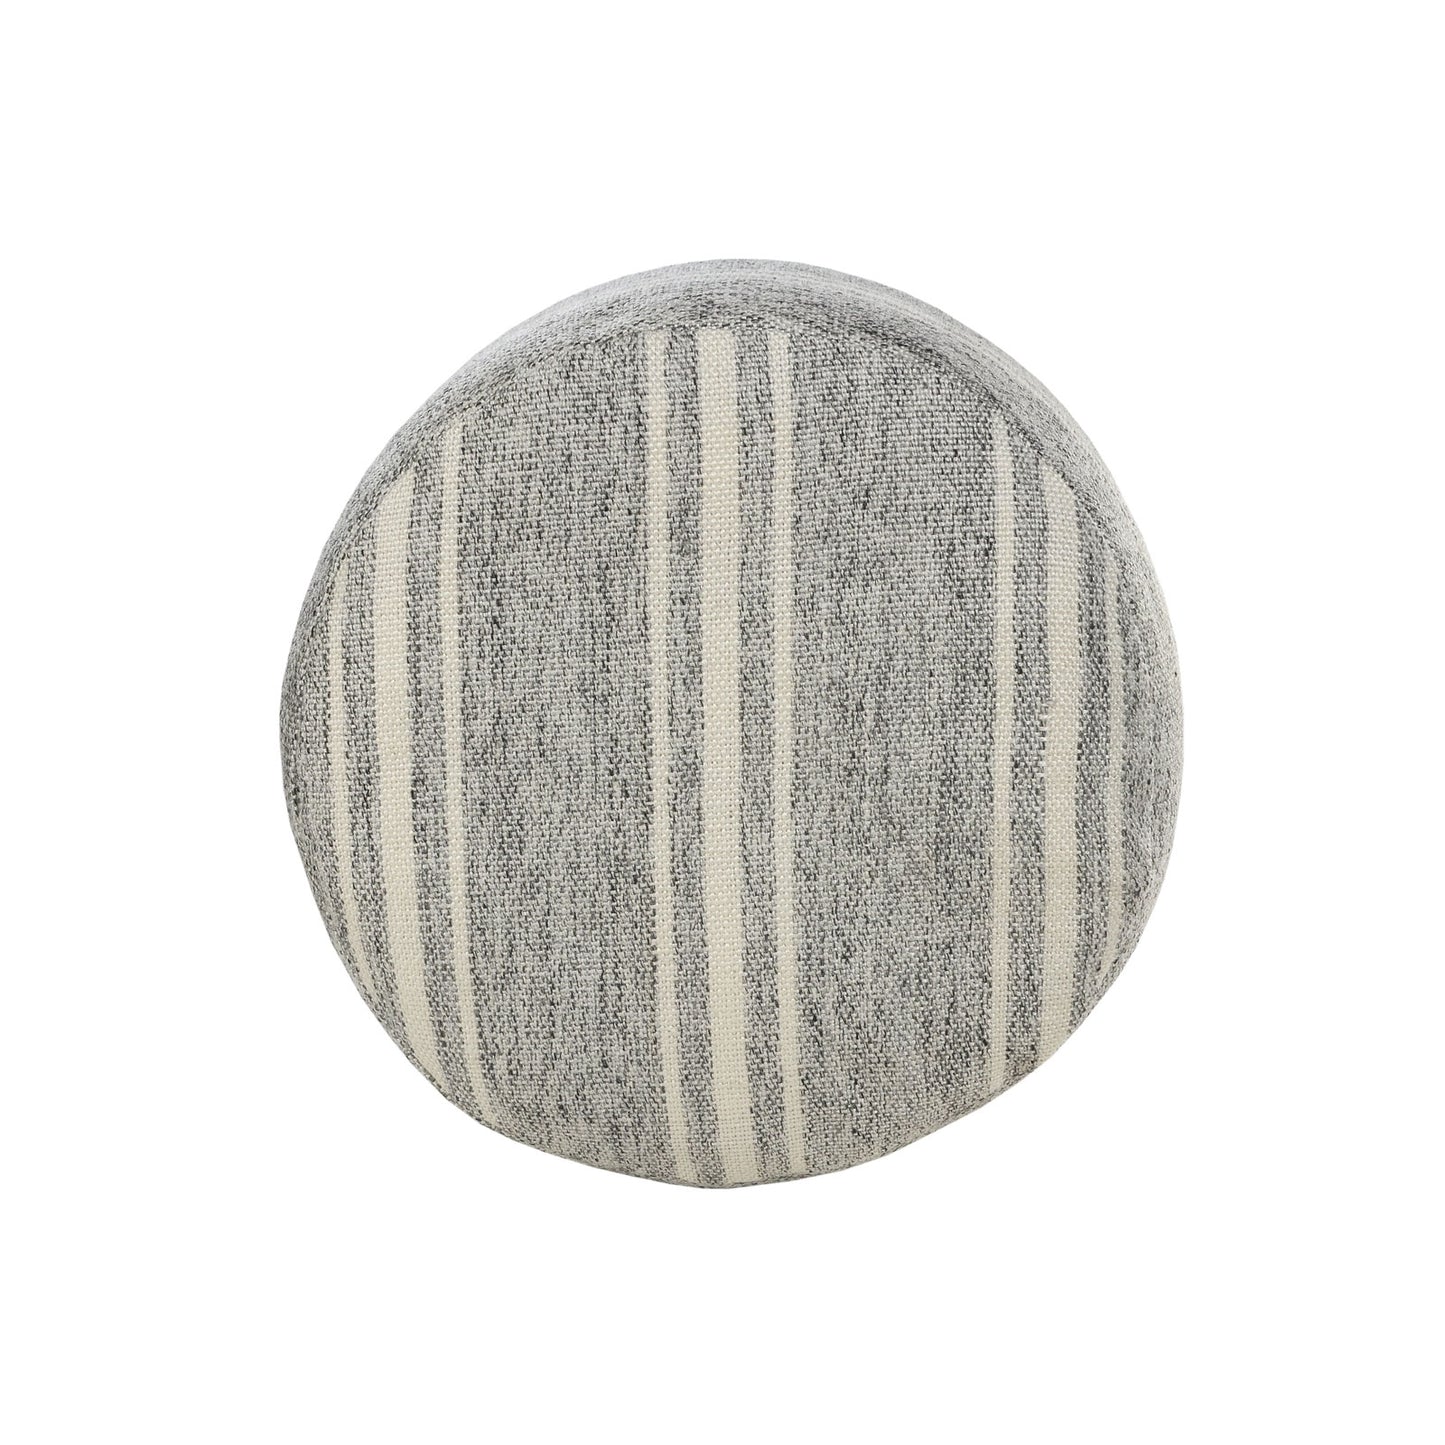 Stripe Indoor / Outdoor Pouf in Gray and White